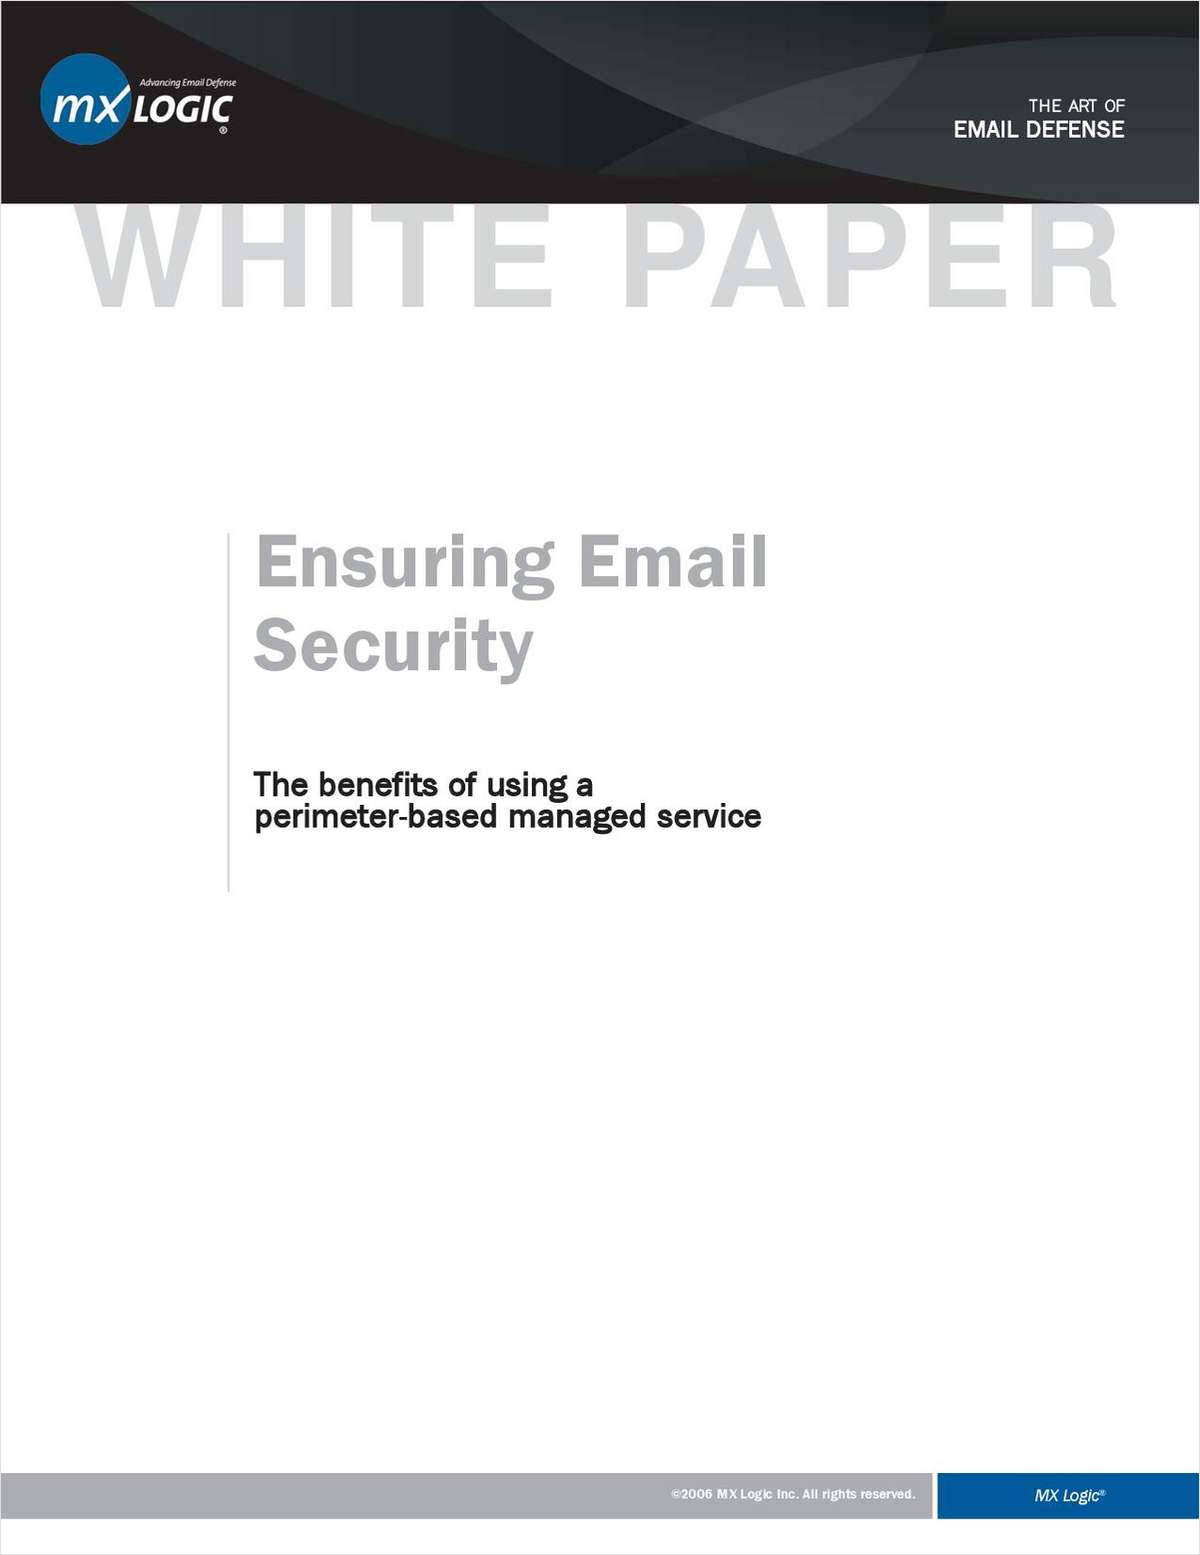 Ensuring Email Security